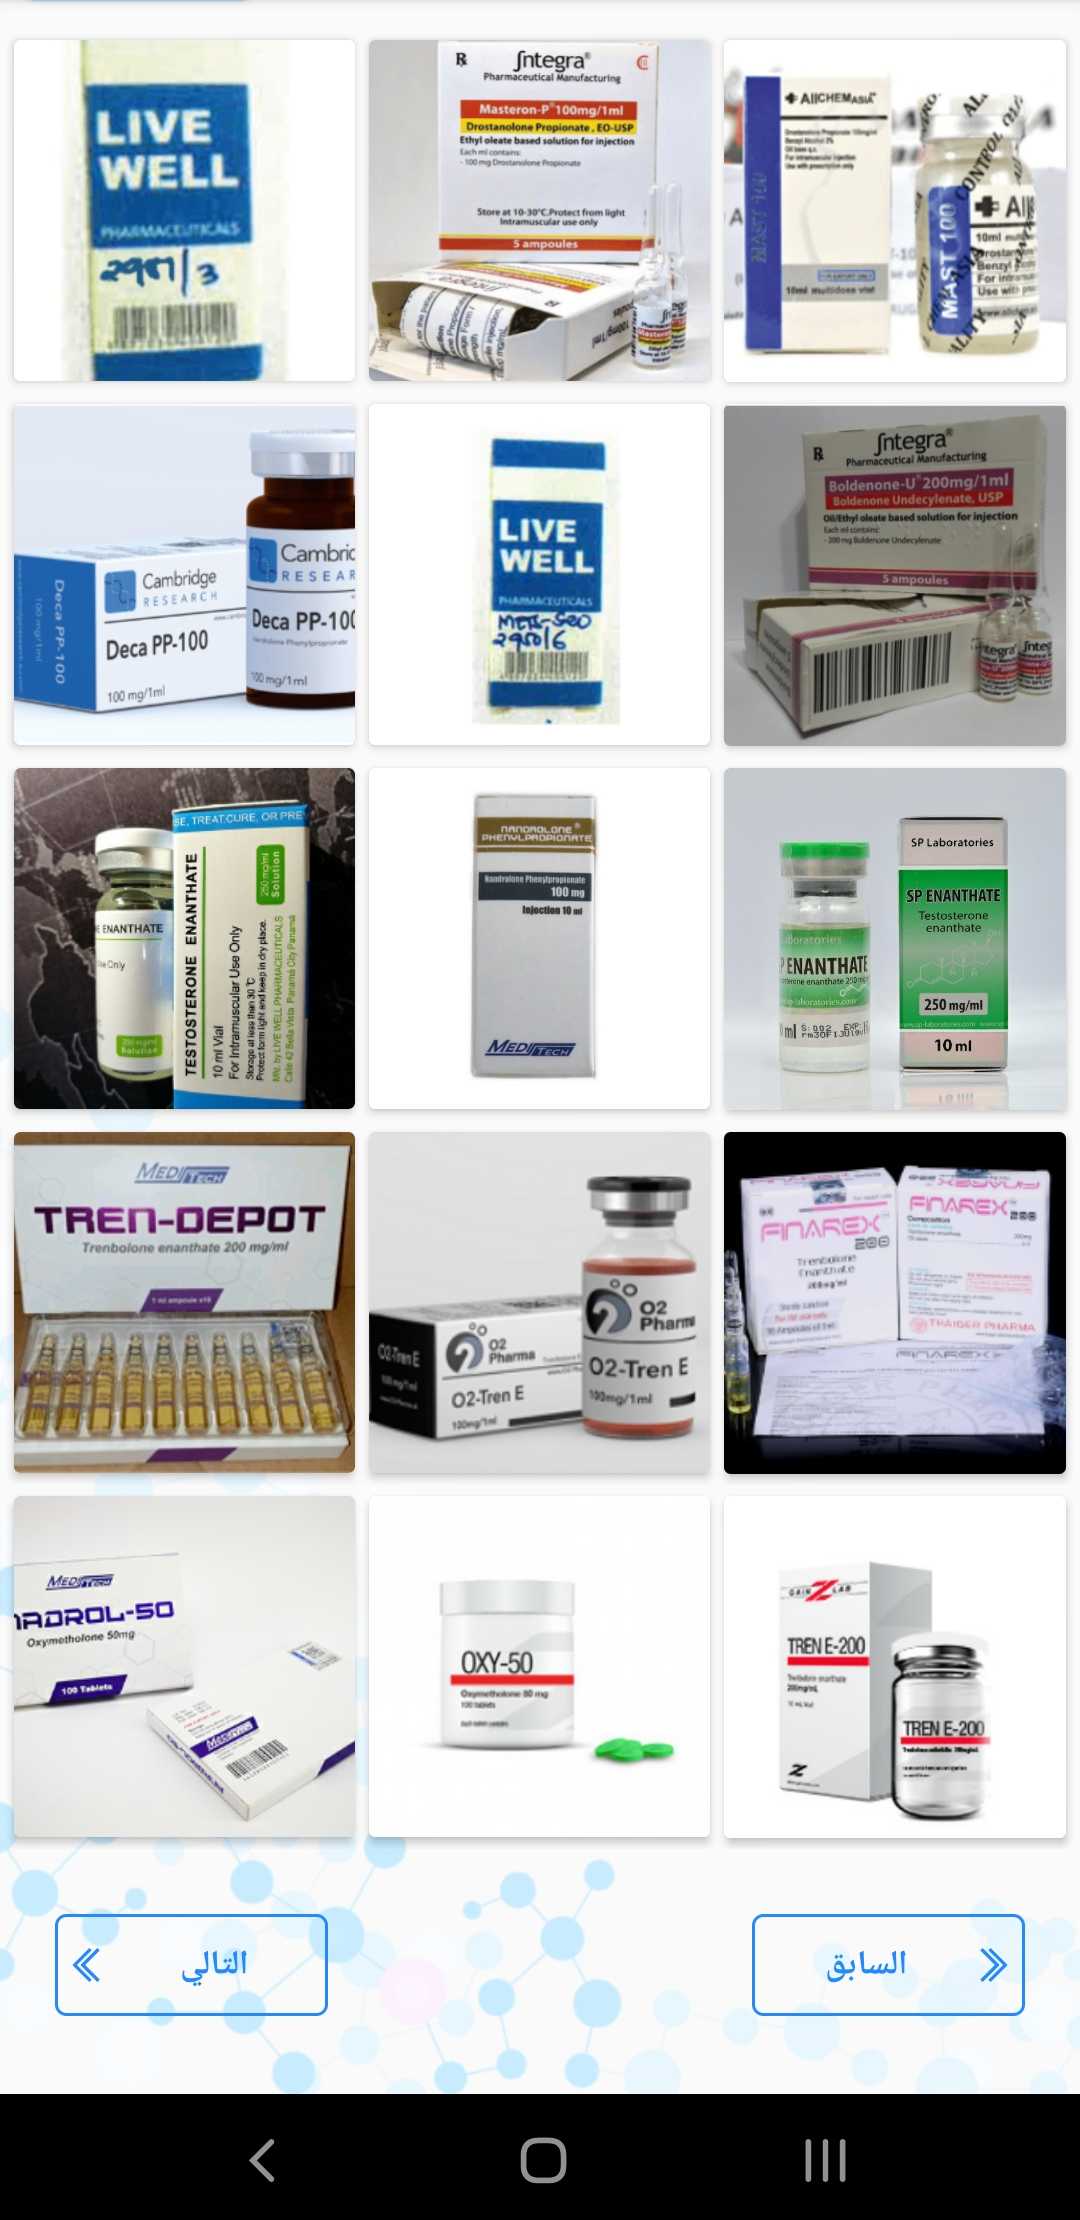 Wikibolics, steroids, anabolics, supplements, muscle